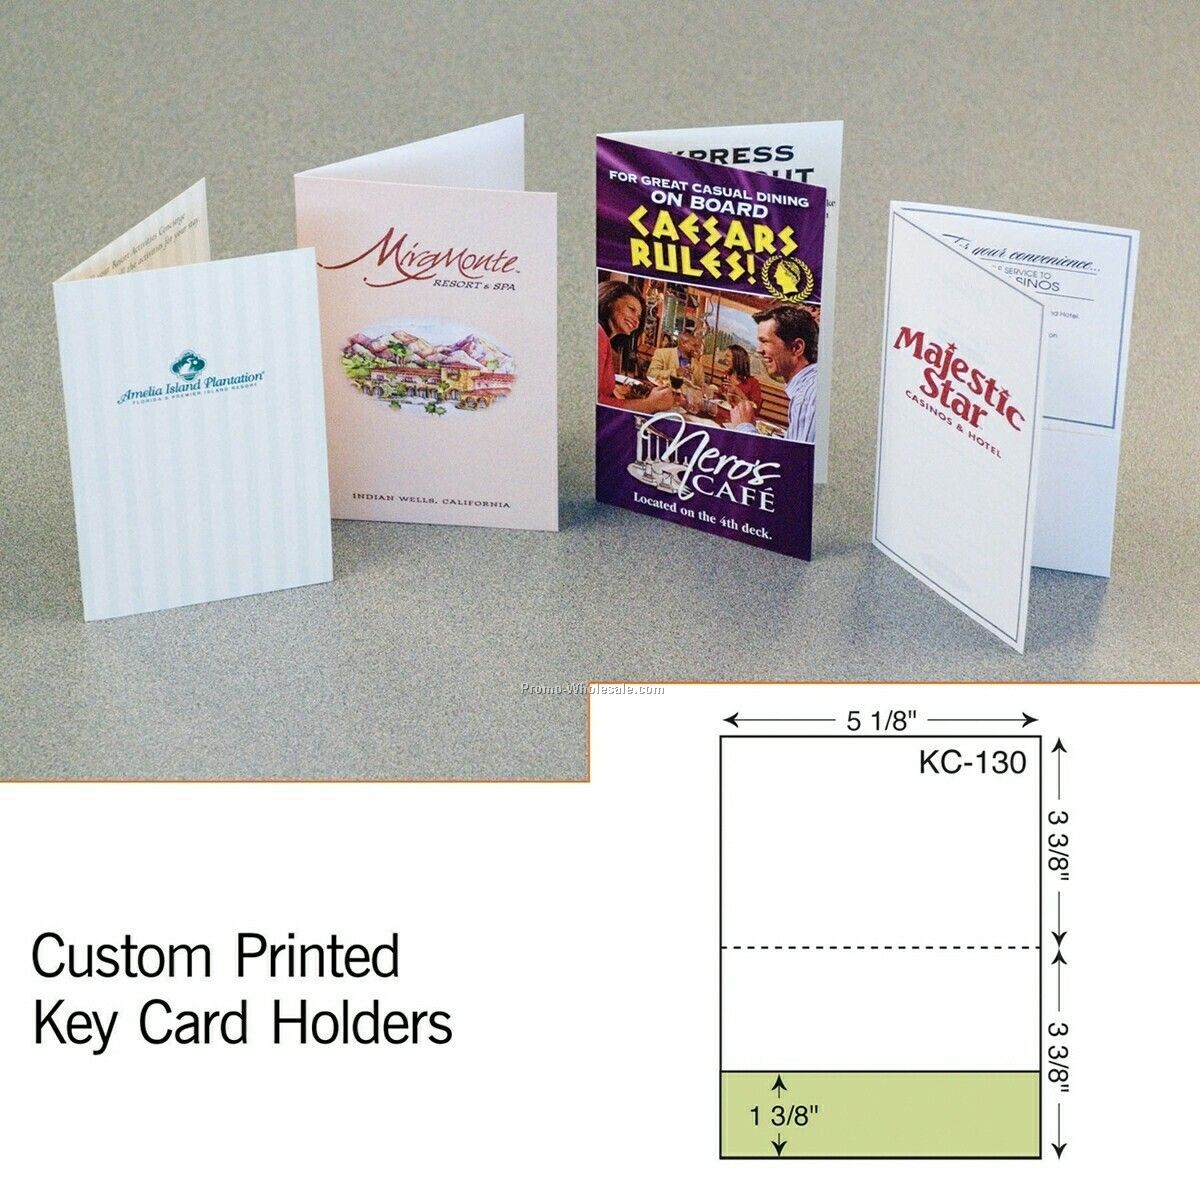 3-3/4"x2-3/4" Key Card W/ Curved Right Pocket (1 Color)